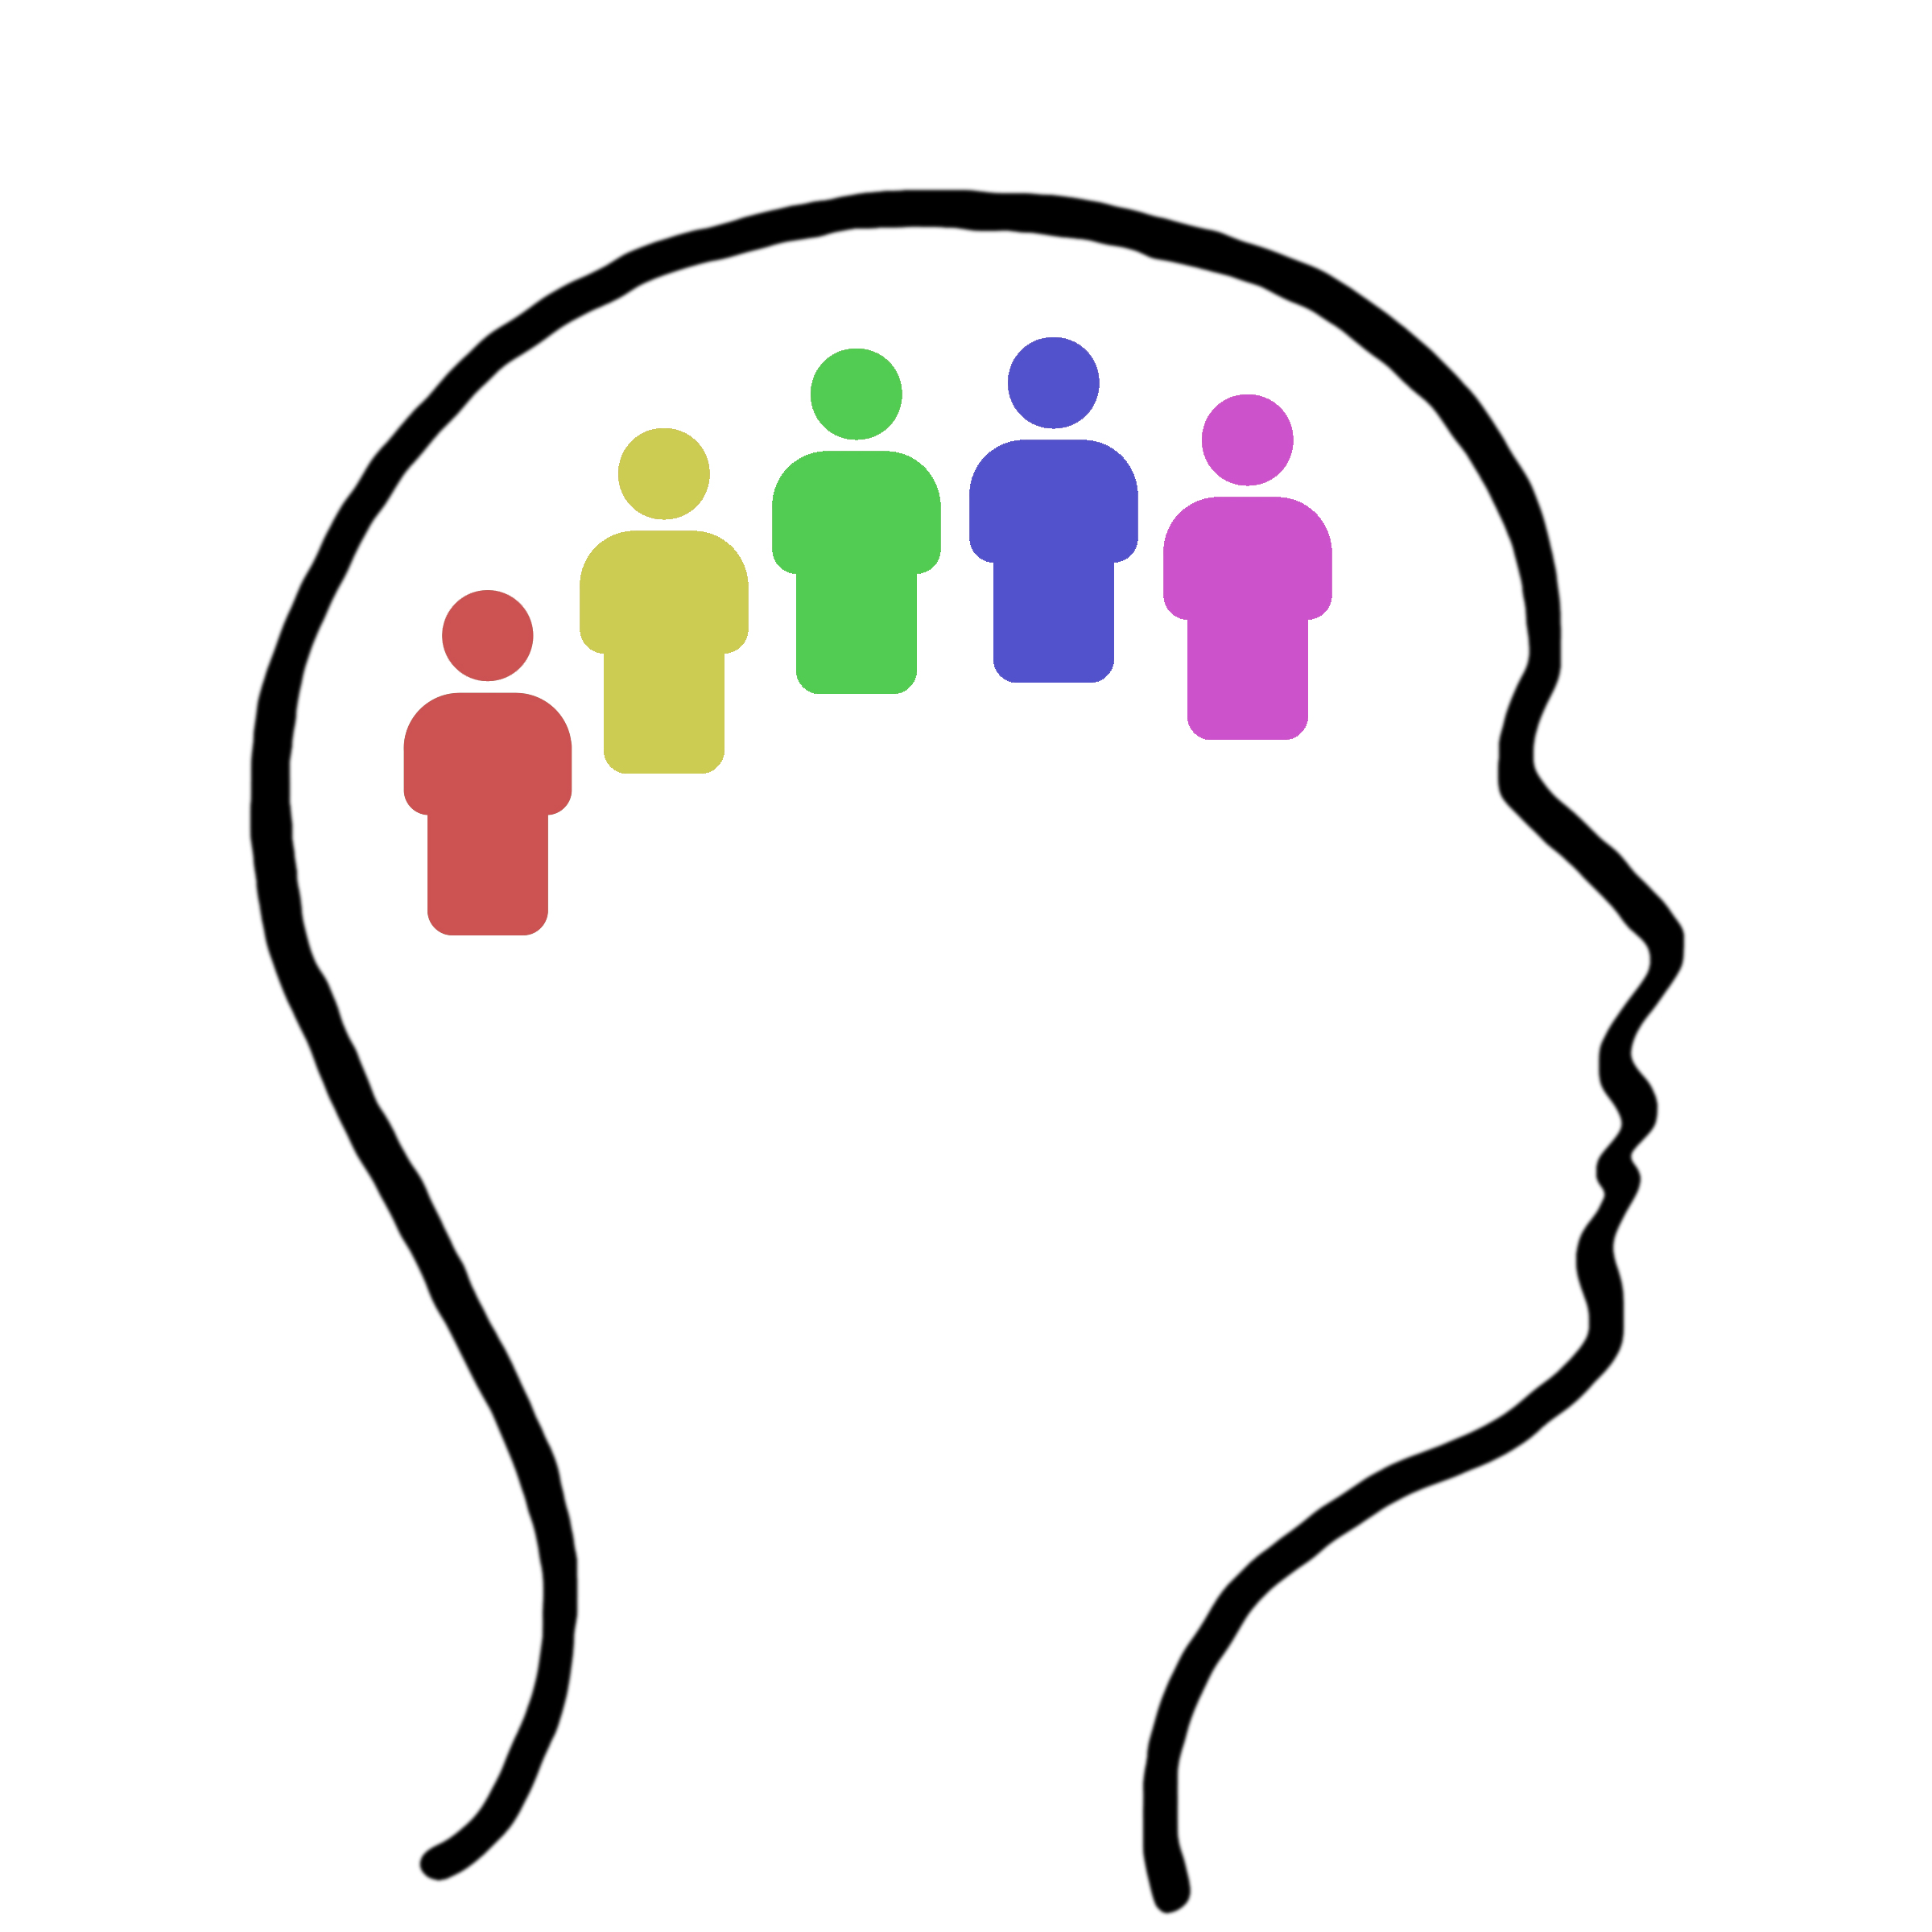 Line drawing of a human head with colorful human icons inside. This symbolic artwork is included for decorative purposes and should not be construed as part of Syracuse University branding.